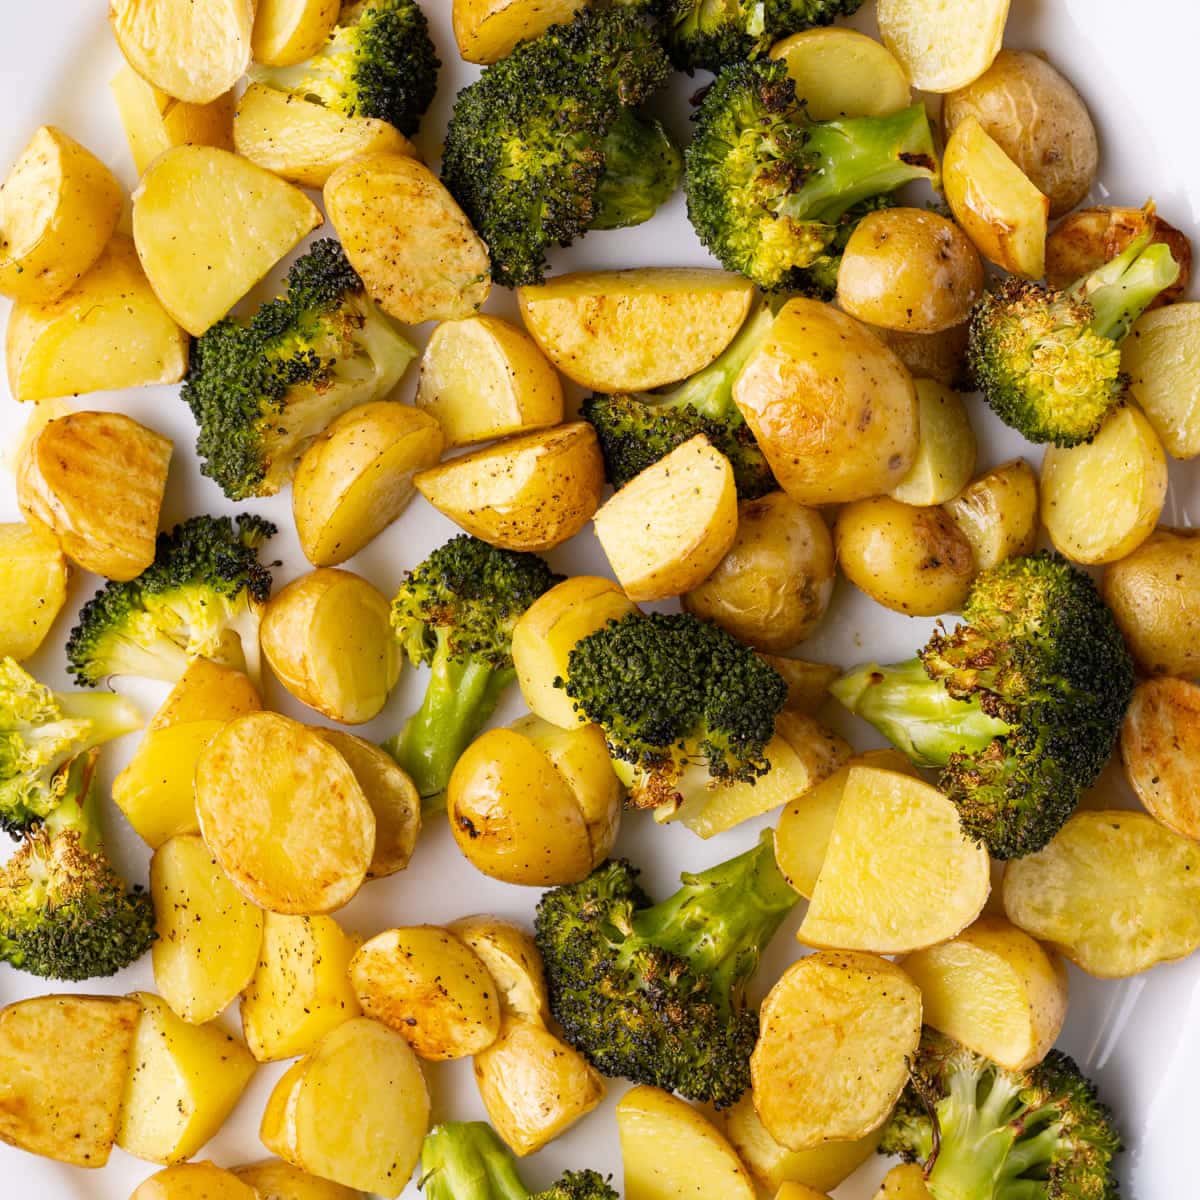 Golden brown honey gold potatoes and crispy roasted broccoli on a serving platter.